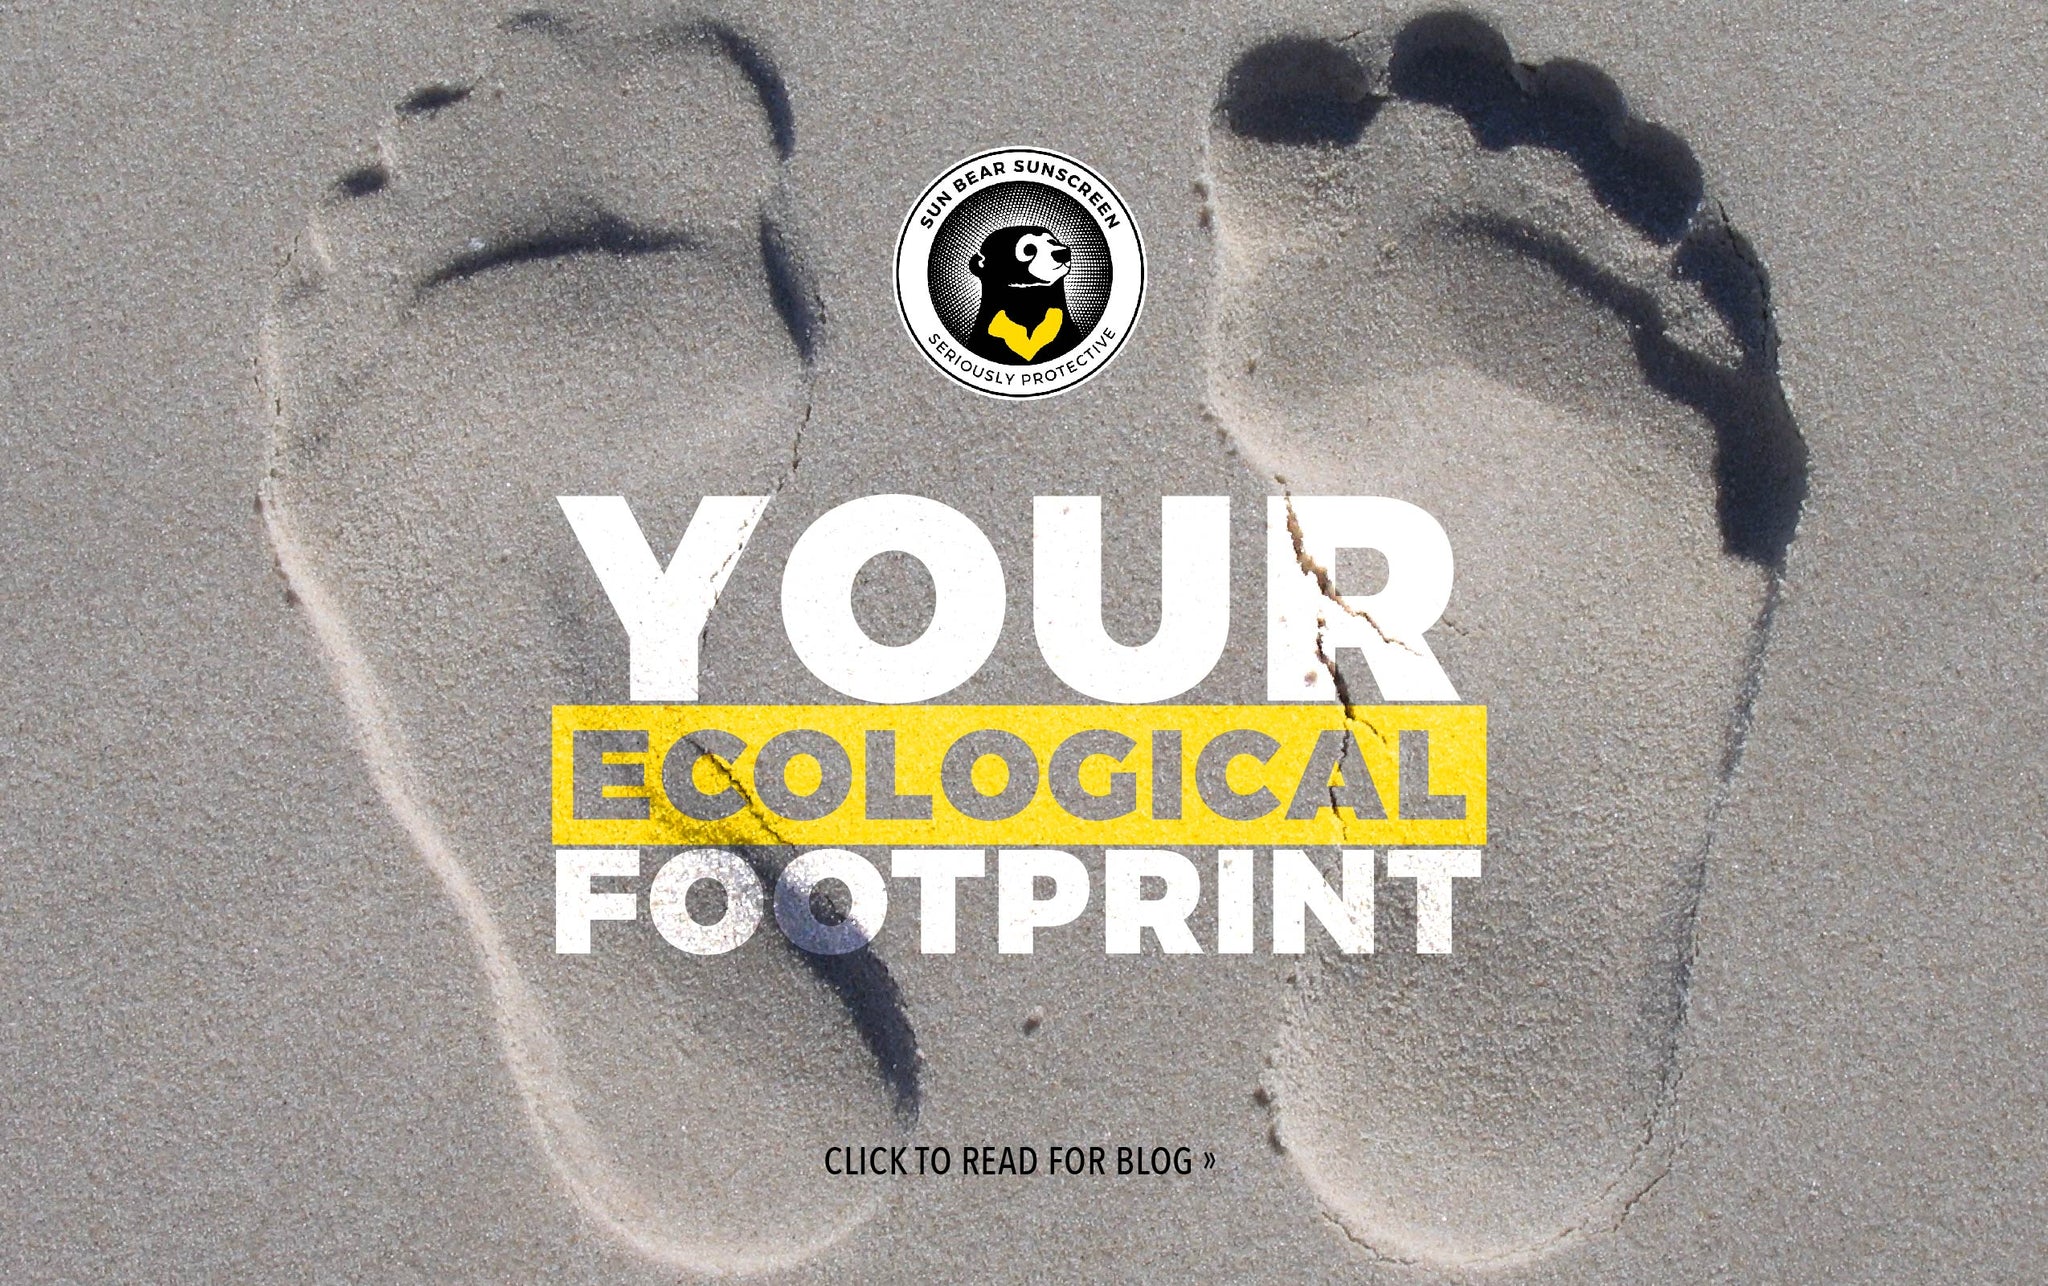 What's Your Footprint?